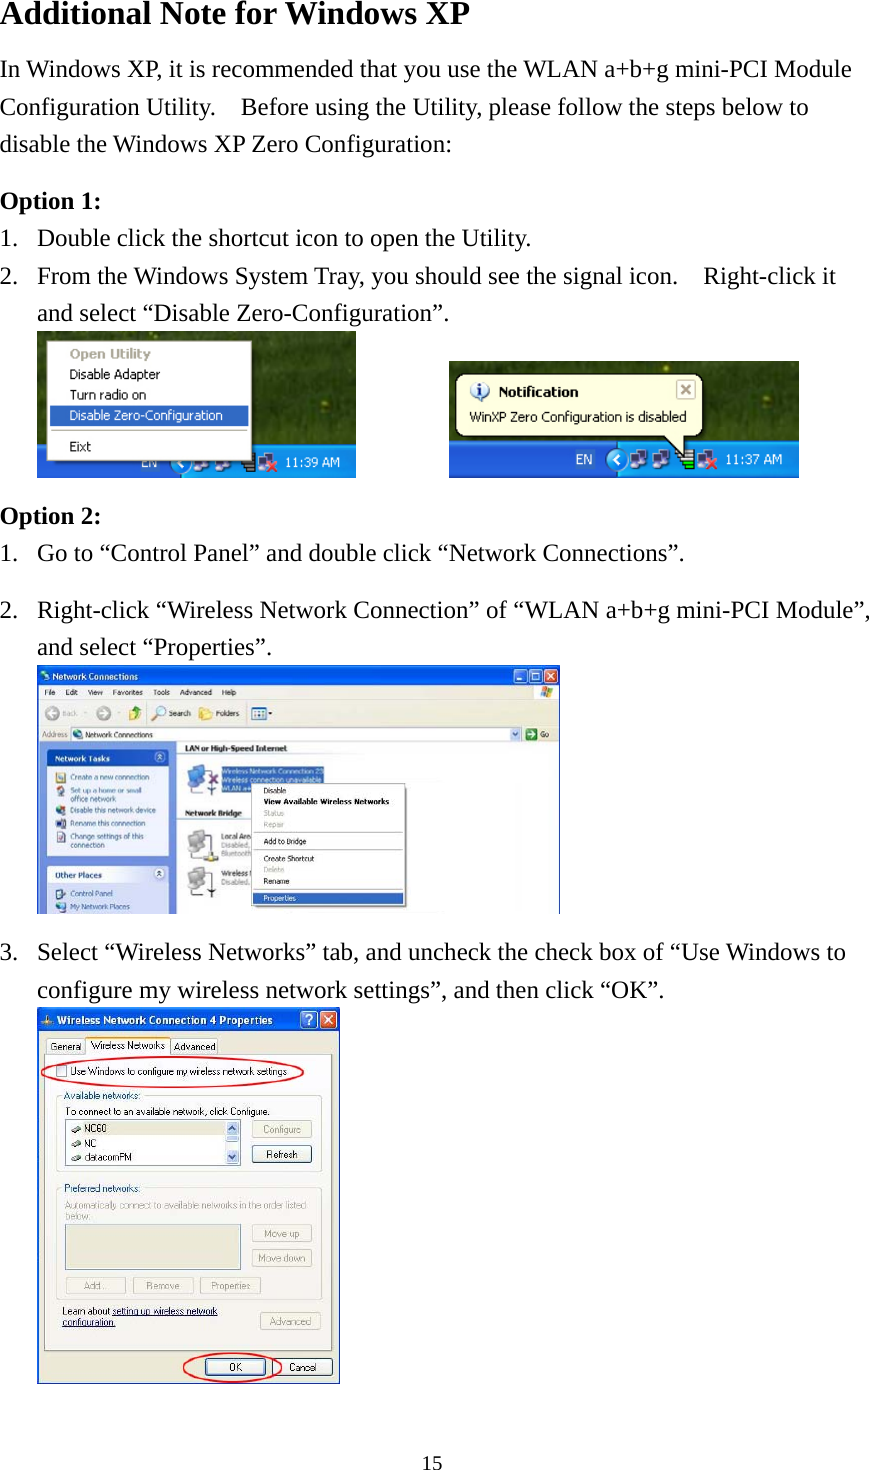  15Additional Note for Windows XP   In Windows XP, it is recommended that you use the WLAN a+b+g mini-PCI Module Configuration Utility.    Before using the Utility, please follow the steps below to disable the Windows XP Zero Configuration:  Option 1: 1. Double click the shortcut icon to open the Utility. 2. From the Windows System Tray, you should see the signal icon.    Right-click it and select “Disable Zero-Configuration”.     Option 2: 1. Go to “Control Panel” and double click “Network Connections”.  2. Right-click “Wireless Network Connection” of “WLAN a+b+g mini-PCI Module”, and select “Properties”.   3. Select “Wireless Networks” tab, and uncheck the check box of “Use Windows to configure my wireless network settings”, and then click “OK”.  